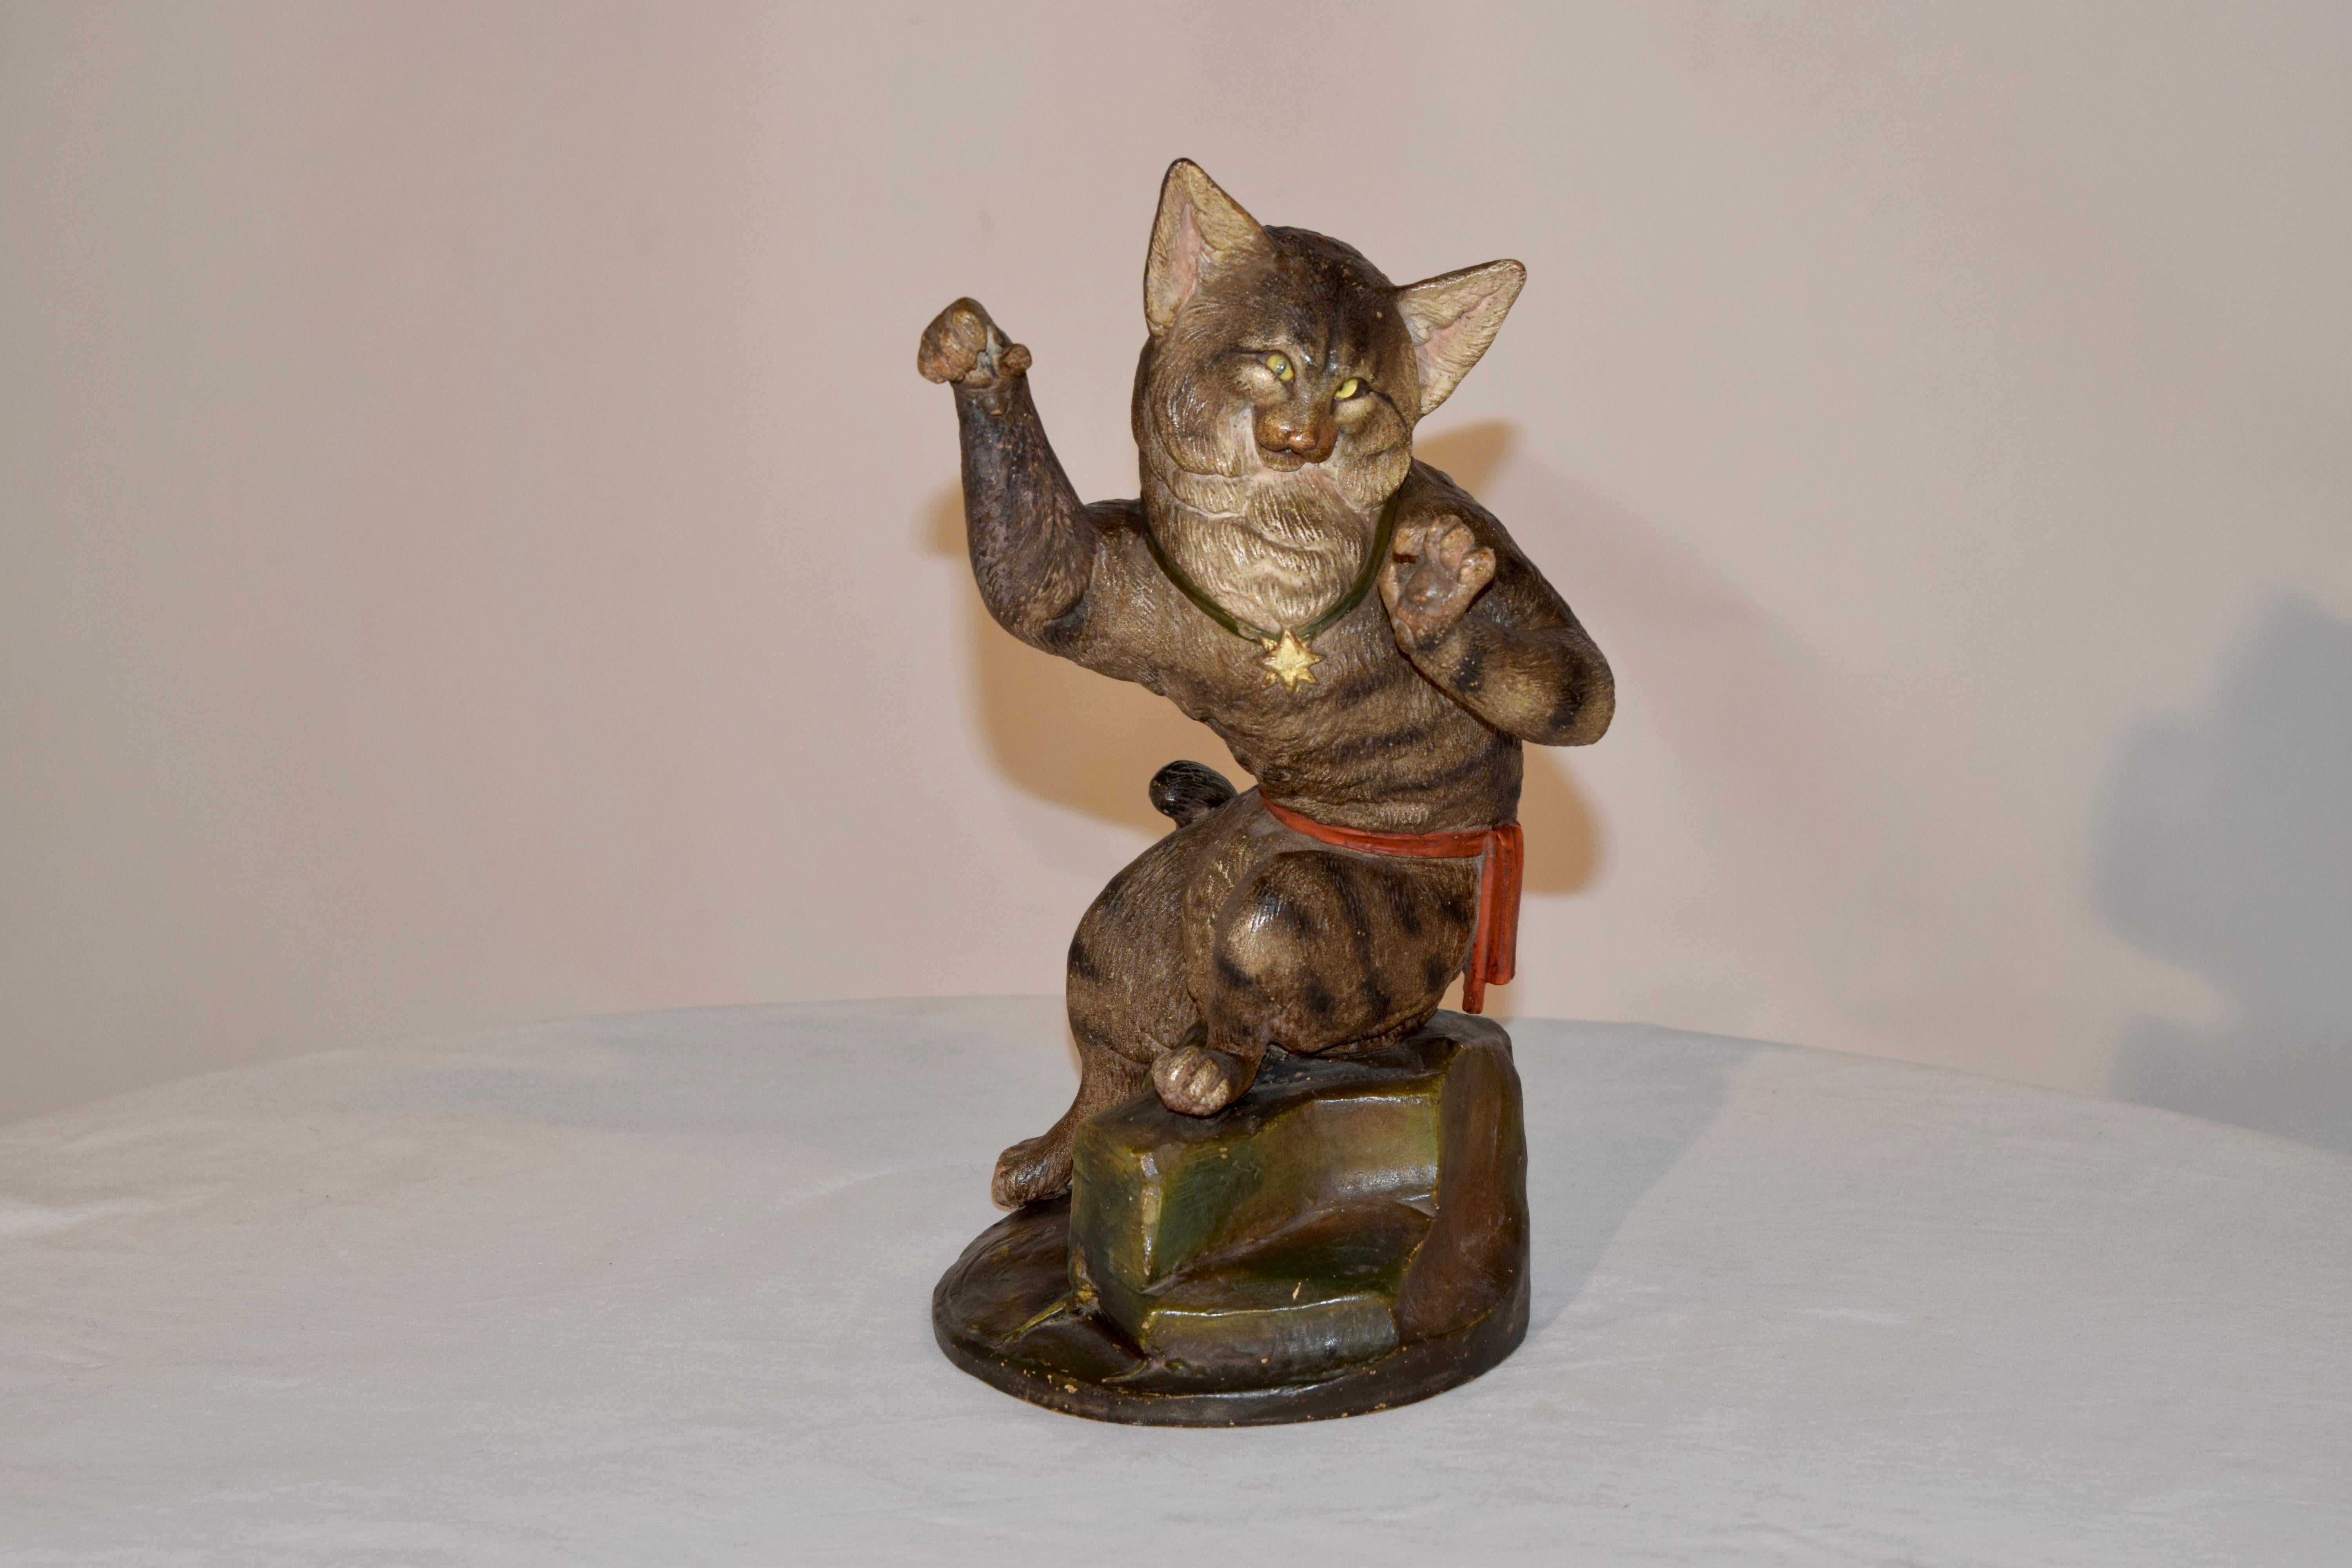 19th century Austrian terracotta cat figure with hand polychromed finish and glass eyes. The cat has a striped coat and is perched on a rocky surface with a red sash around his waist and a gold star medal on a green ribbon around his neck. Very